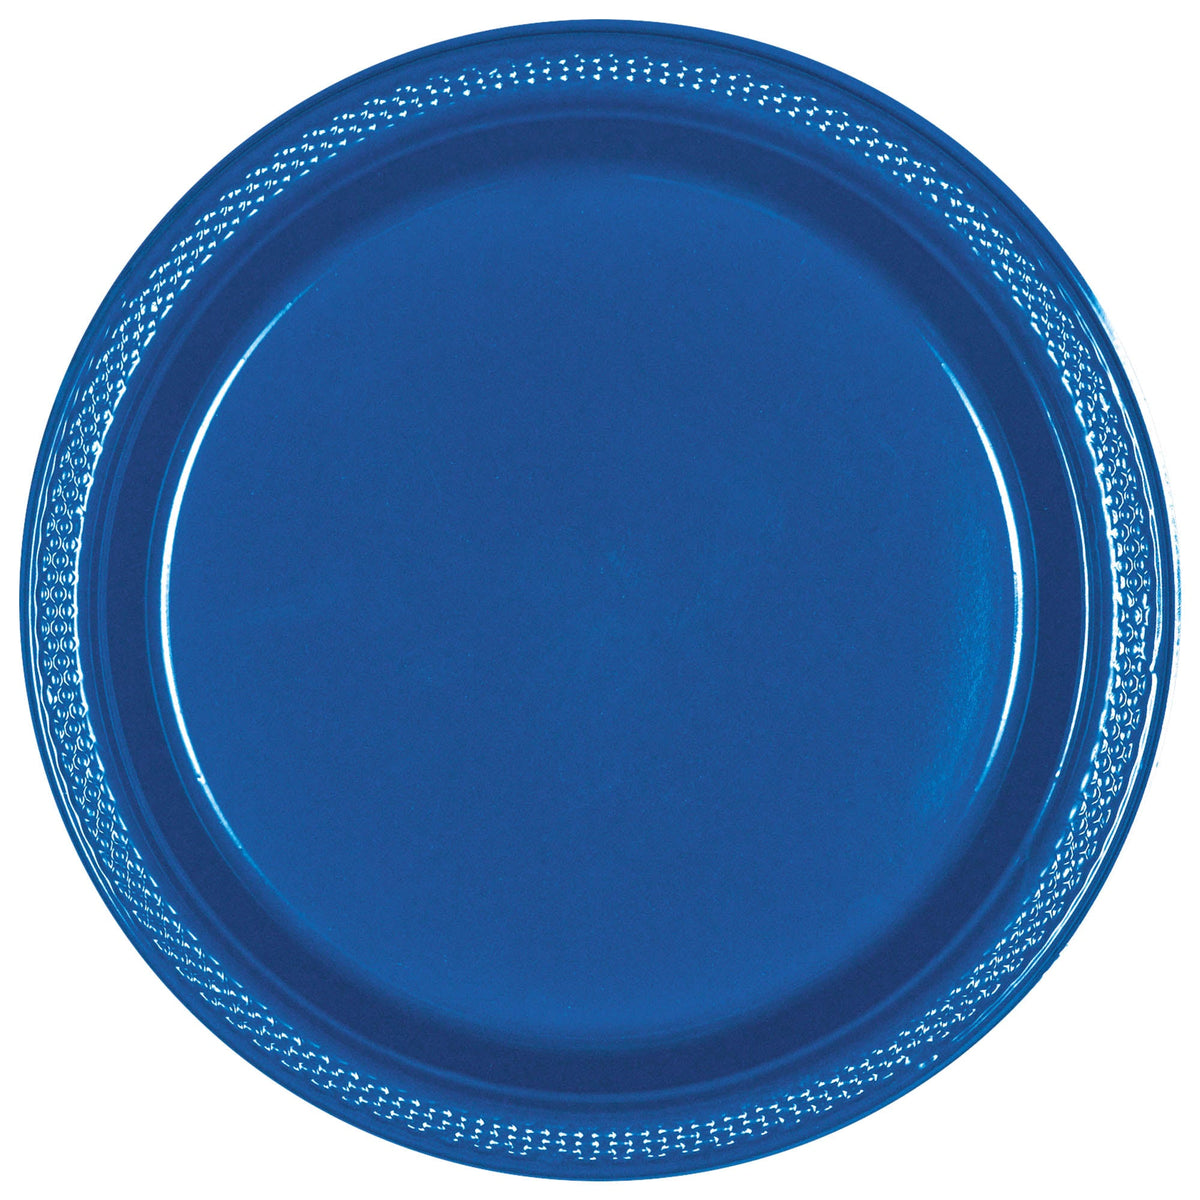 Bright Royal Blue 7" Round Plastic Plates 20 count